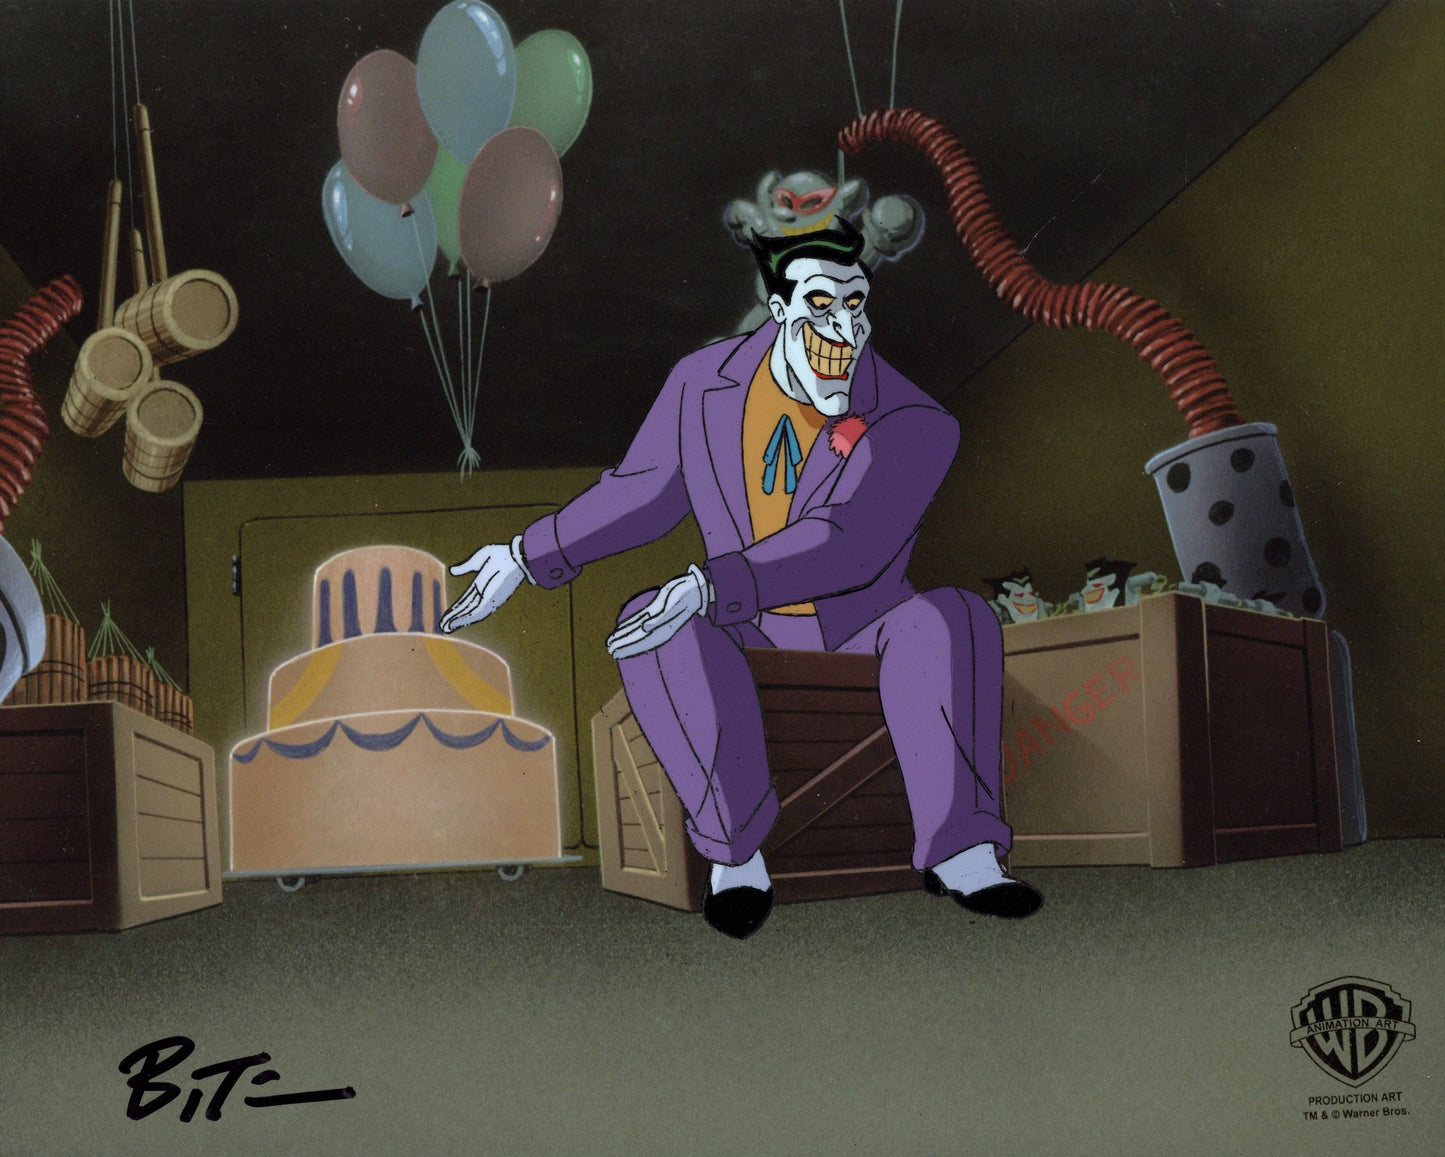 Batman The Animated Series Original Production Cel signed by Bruce Timm: Joker